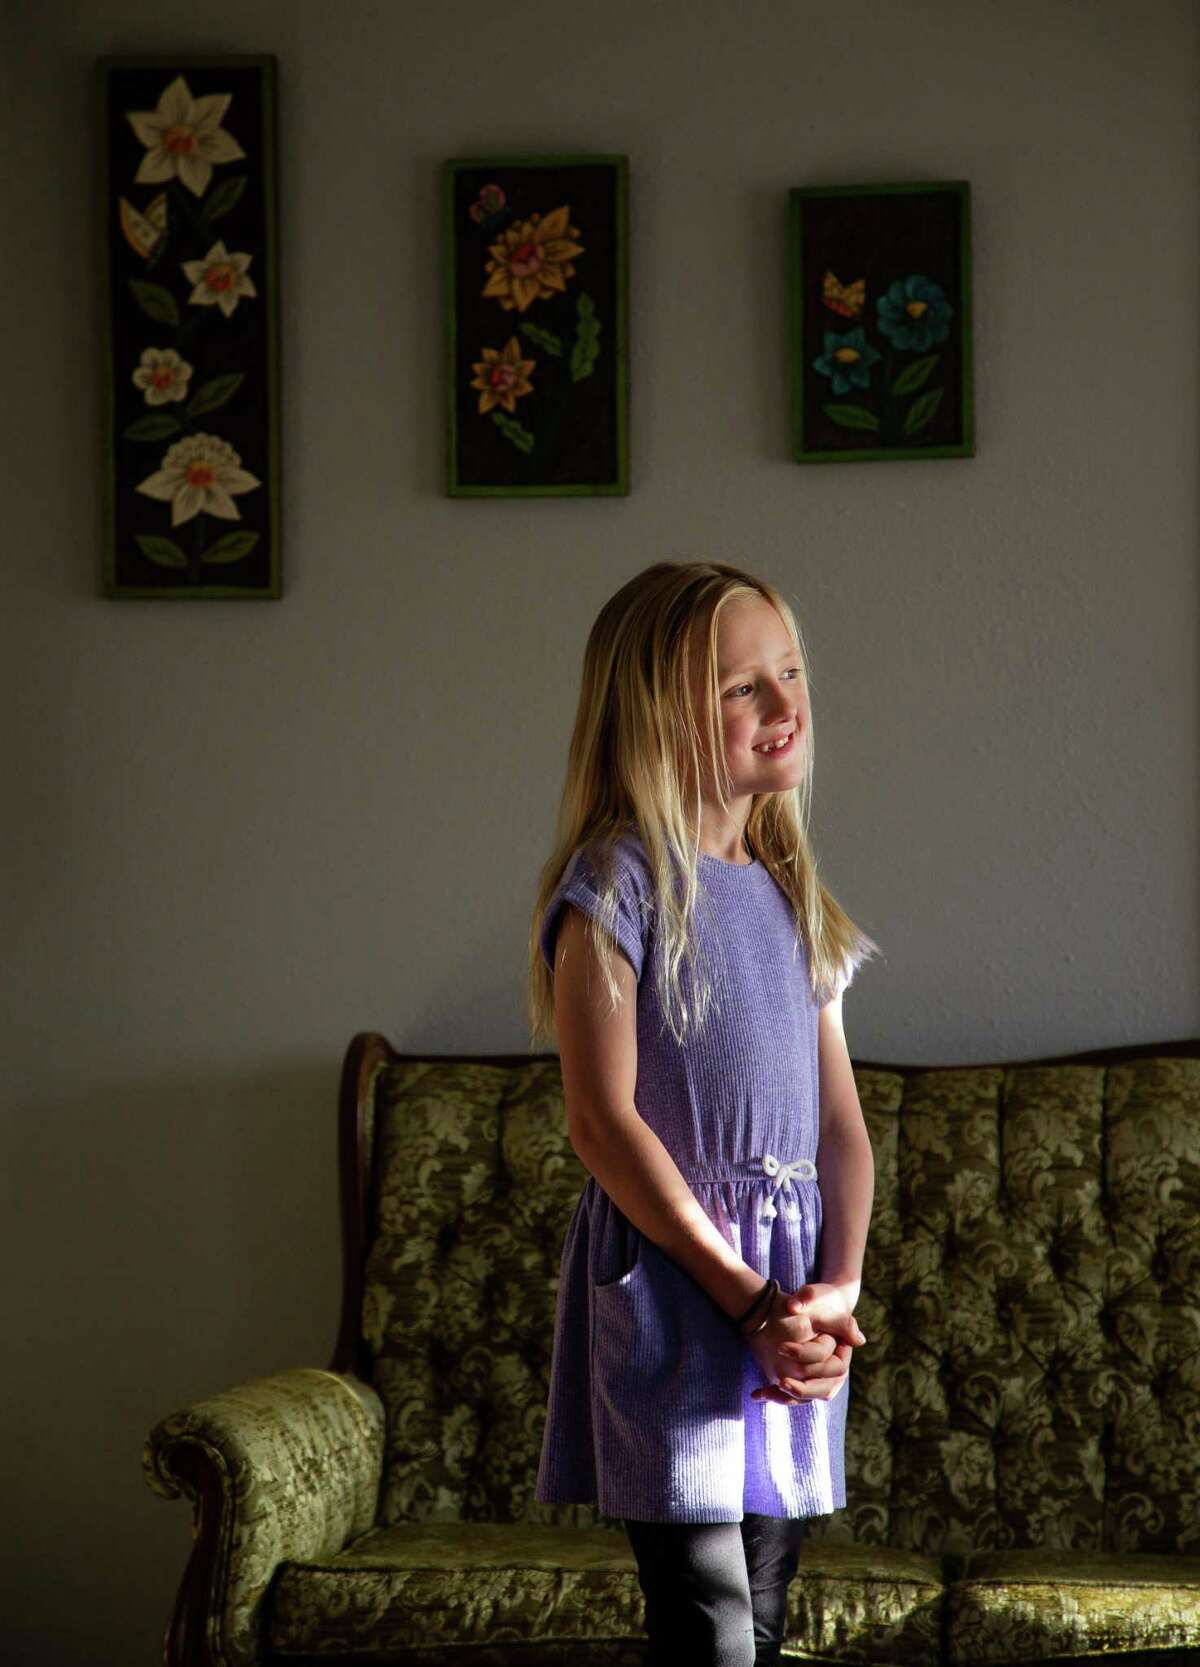 Sunny Bryant, 8, poses for a photograph inside her family’s home on Monday, Feb. 28, 2022, in Houston. Sunny and her parents, who have been outspoken for the rights of transgender children, have been invited as honored guests of U.S. Rep. Sylvia Garcia to virtually attend President Joe Biden's second State of the Union address.